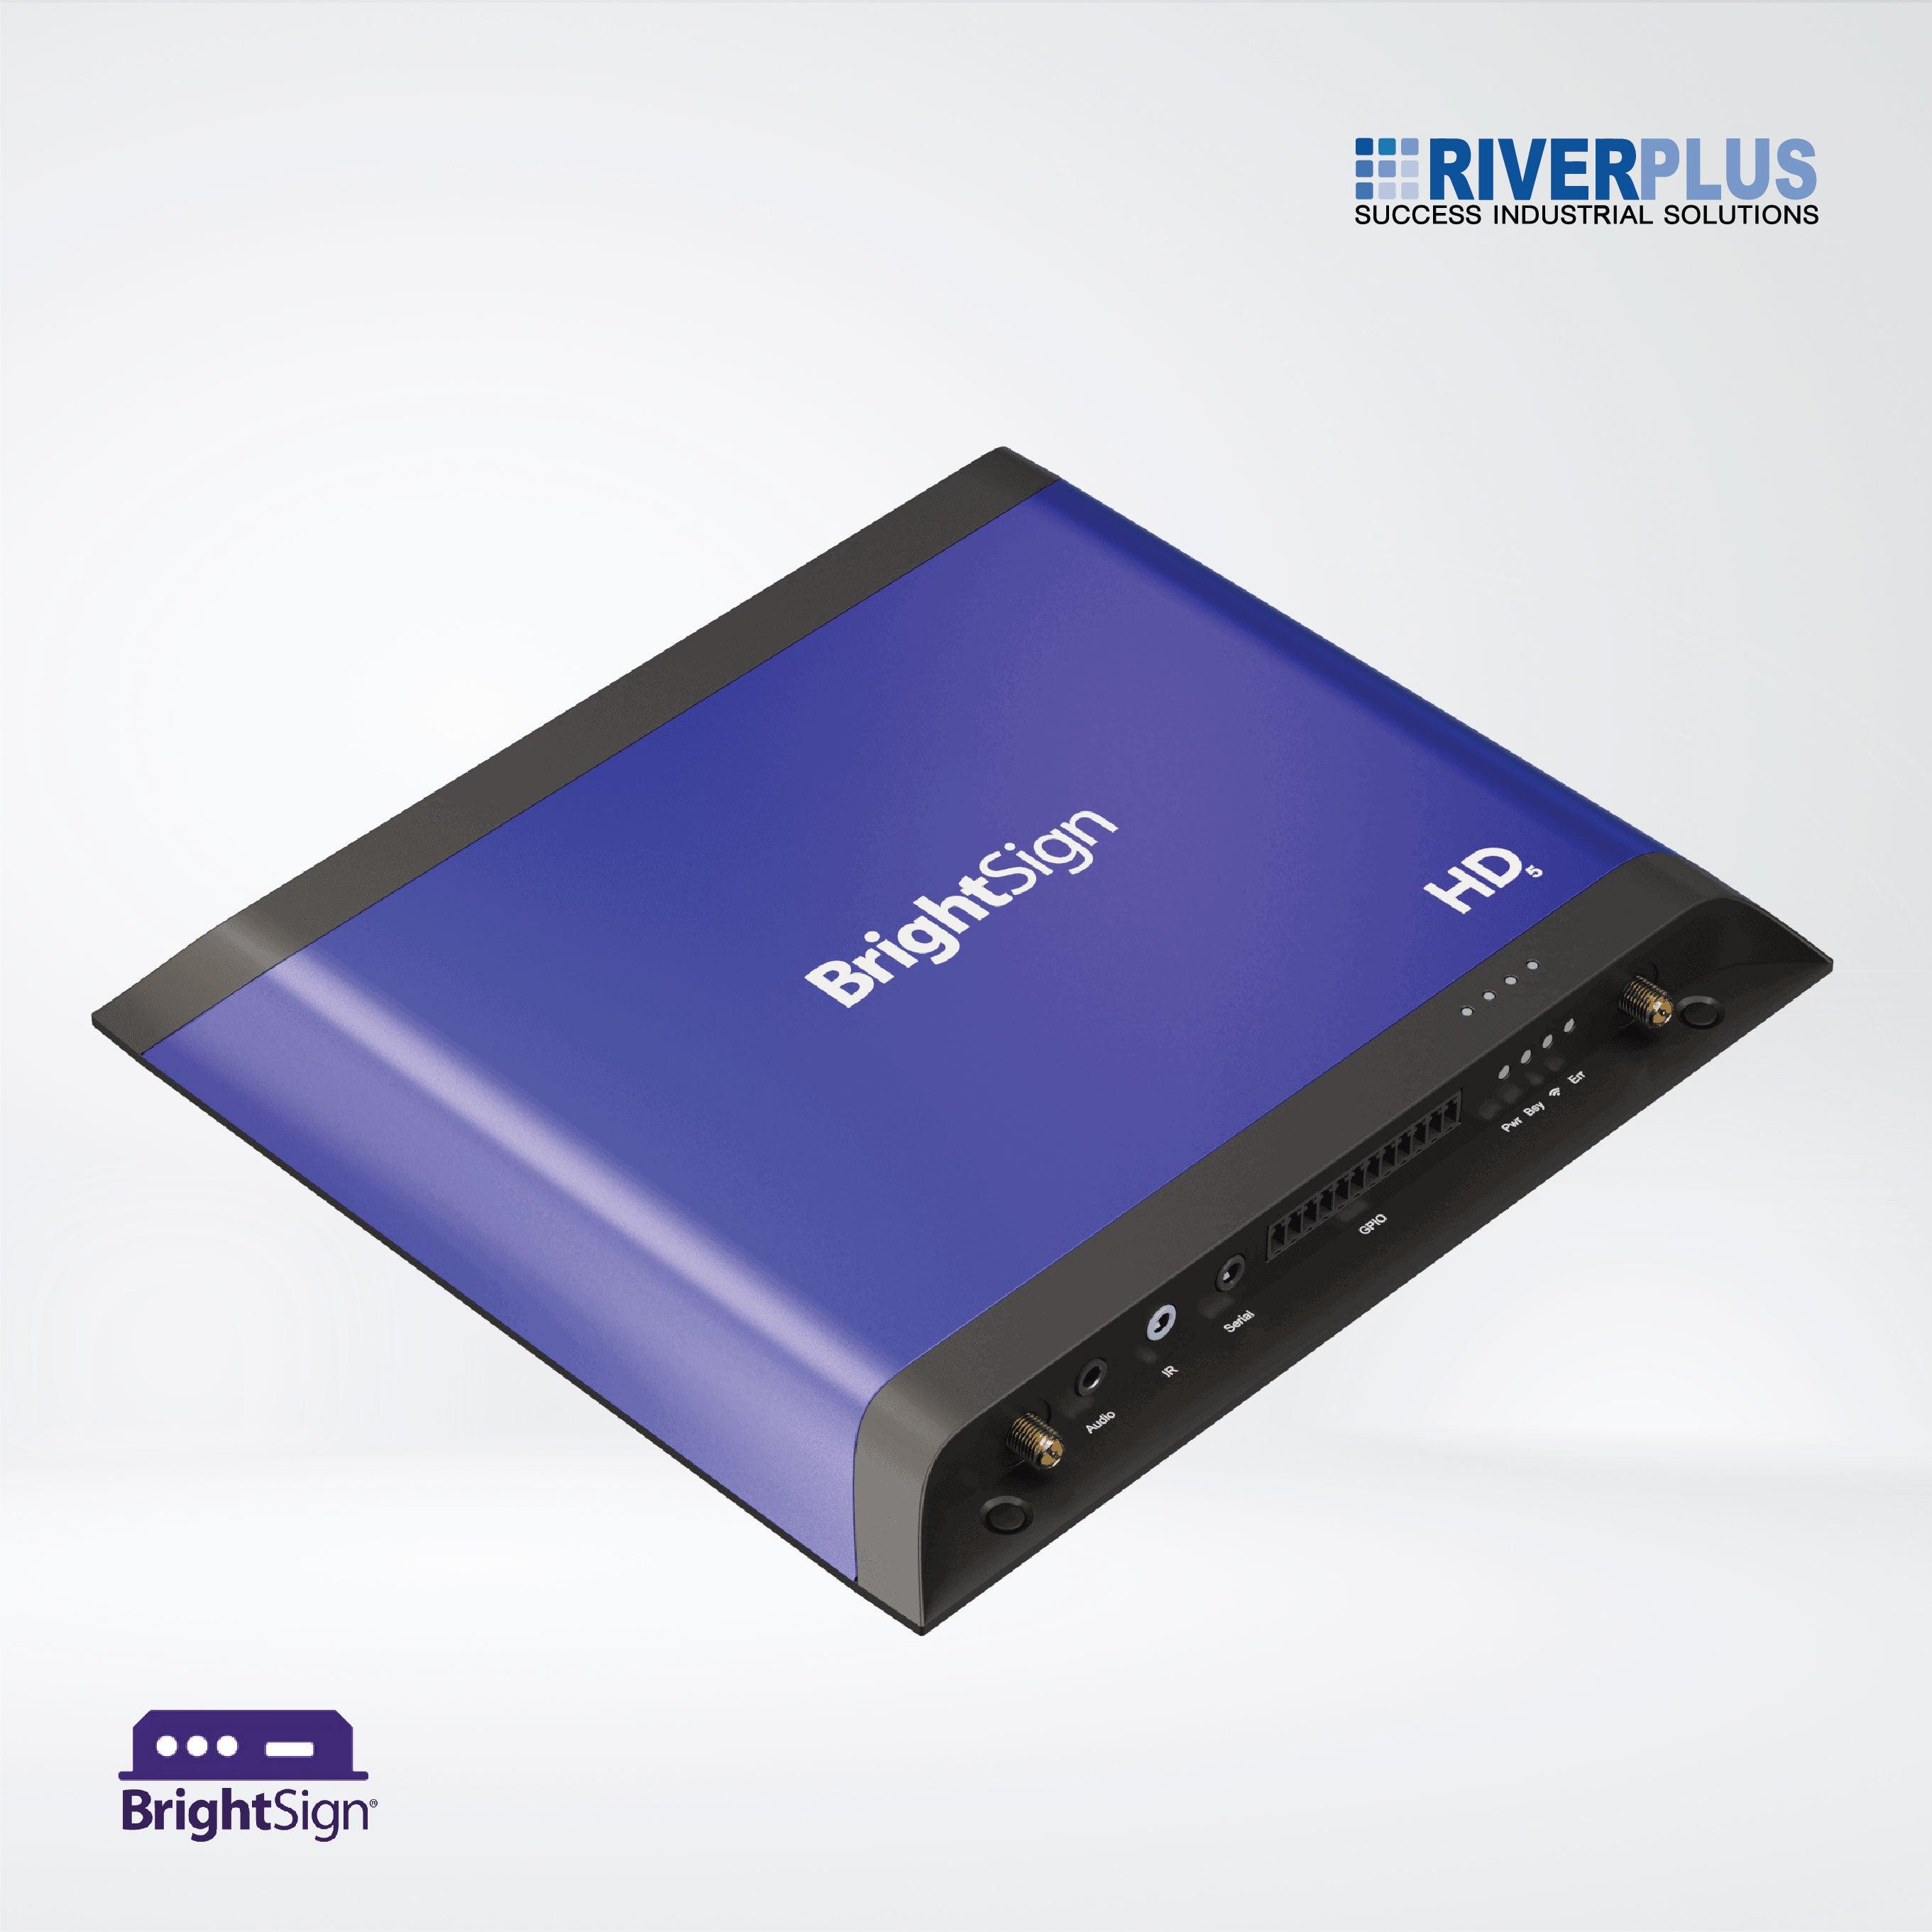 HD1025 Built for Interactivity & 4k Content , Expanded I/O + 64GB Micro SD - Riverplus